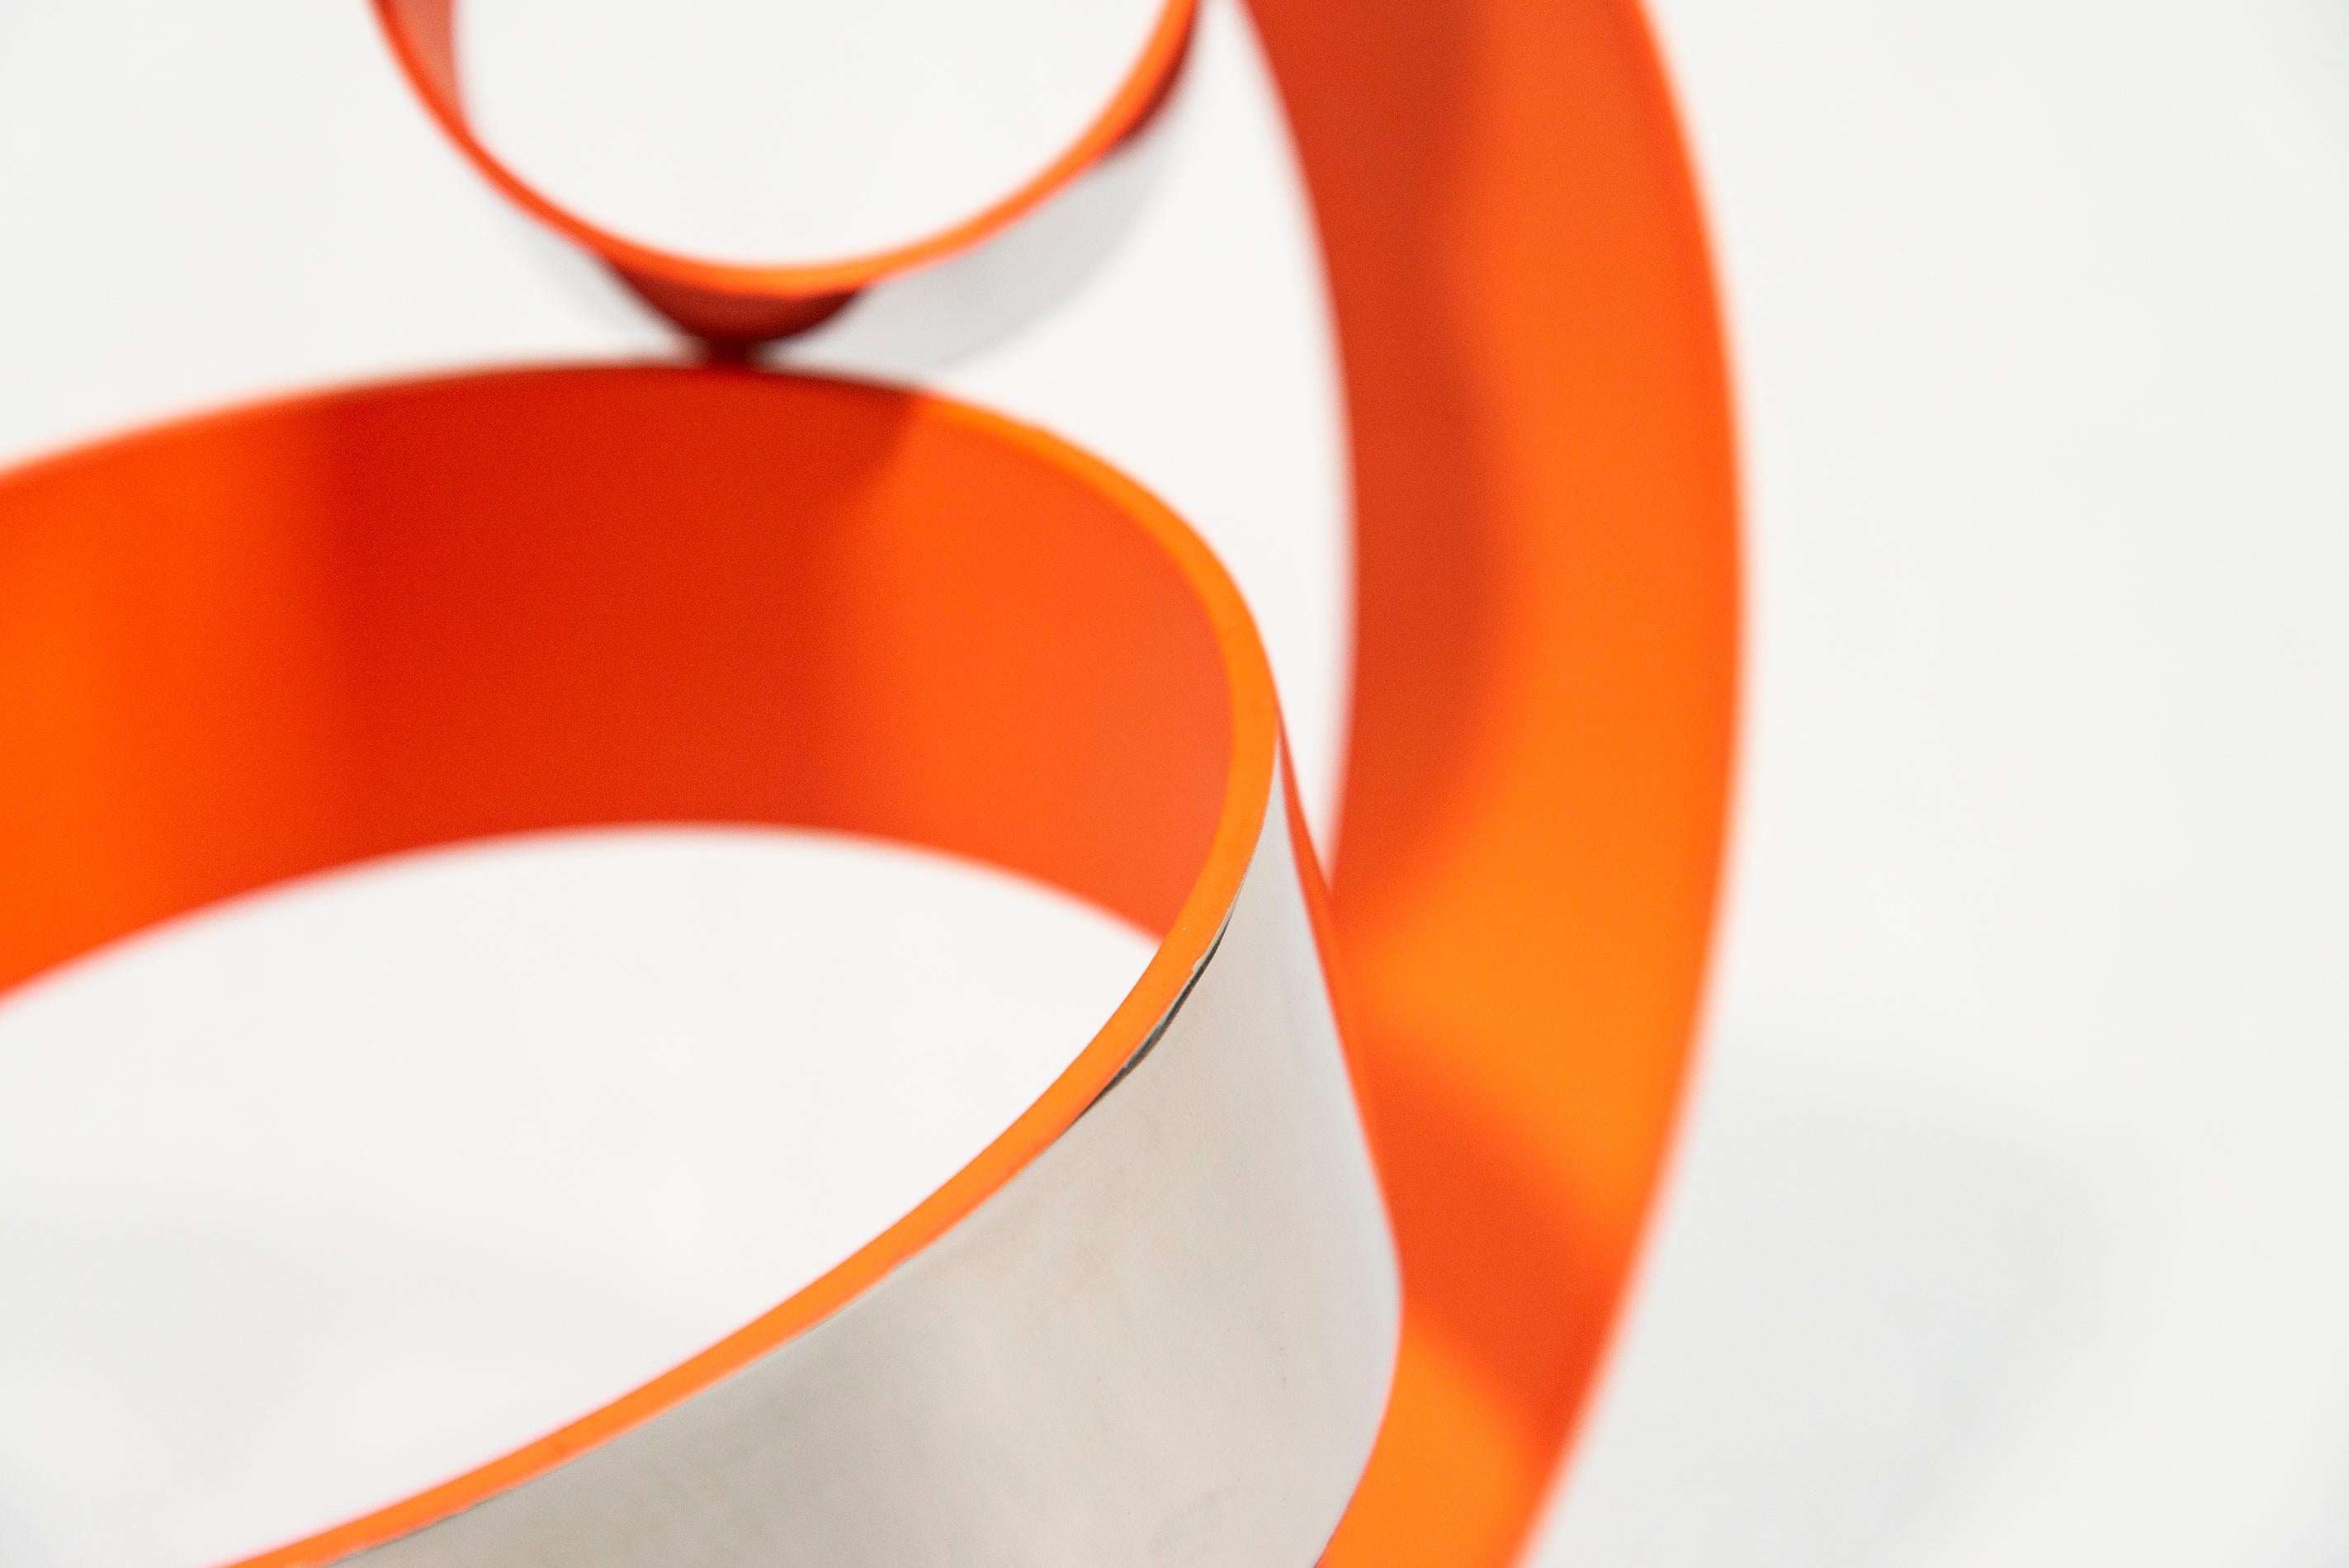 Four Ring Temps Zero Small Orange 1/10 - abstract, stainless steel, sculpture For Sale 2